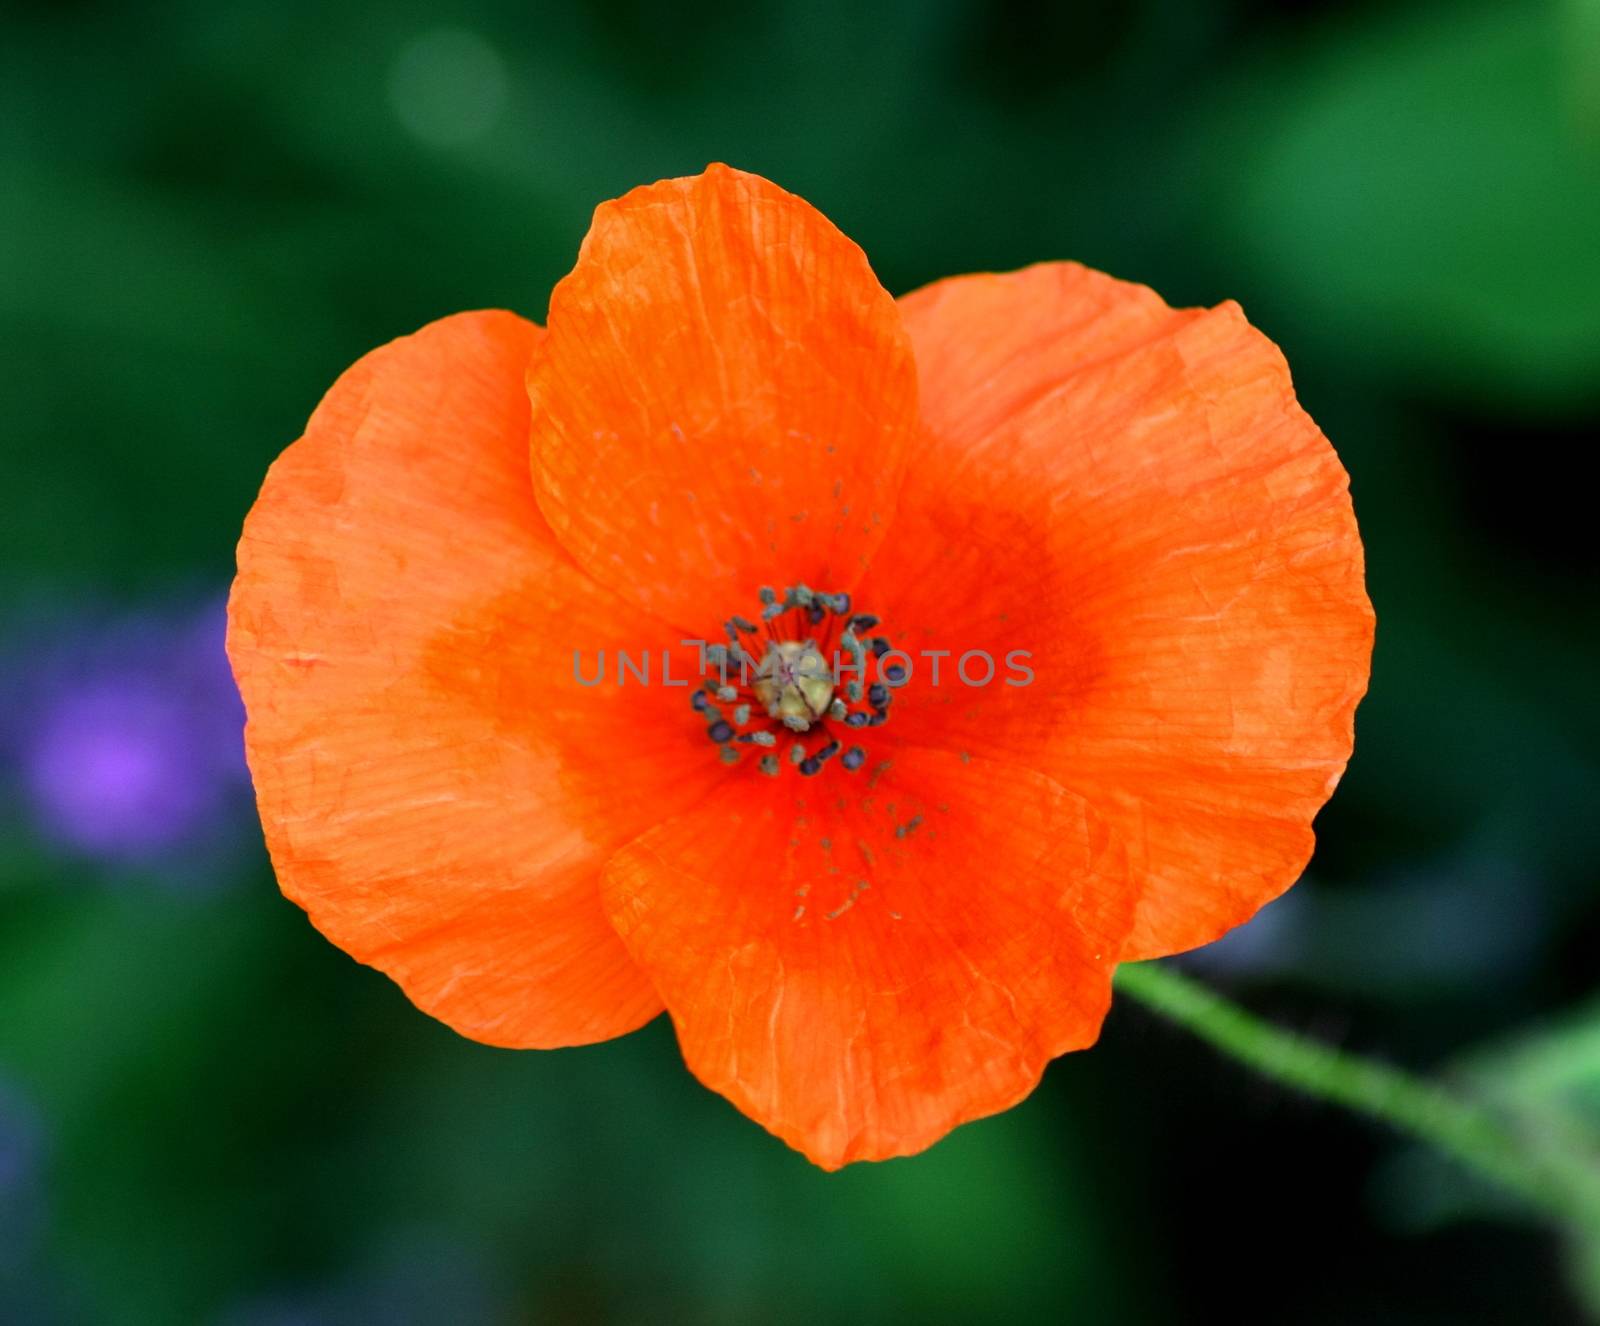 Close-up of an orange-flowered poppies